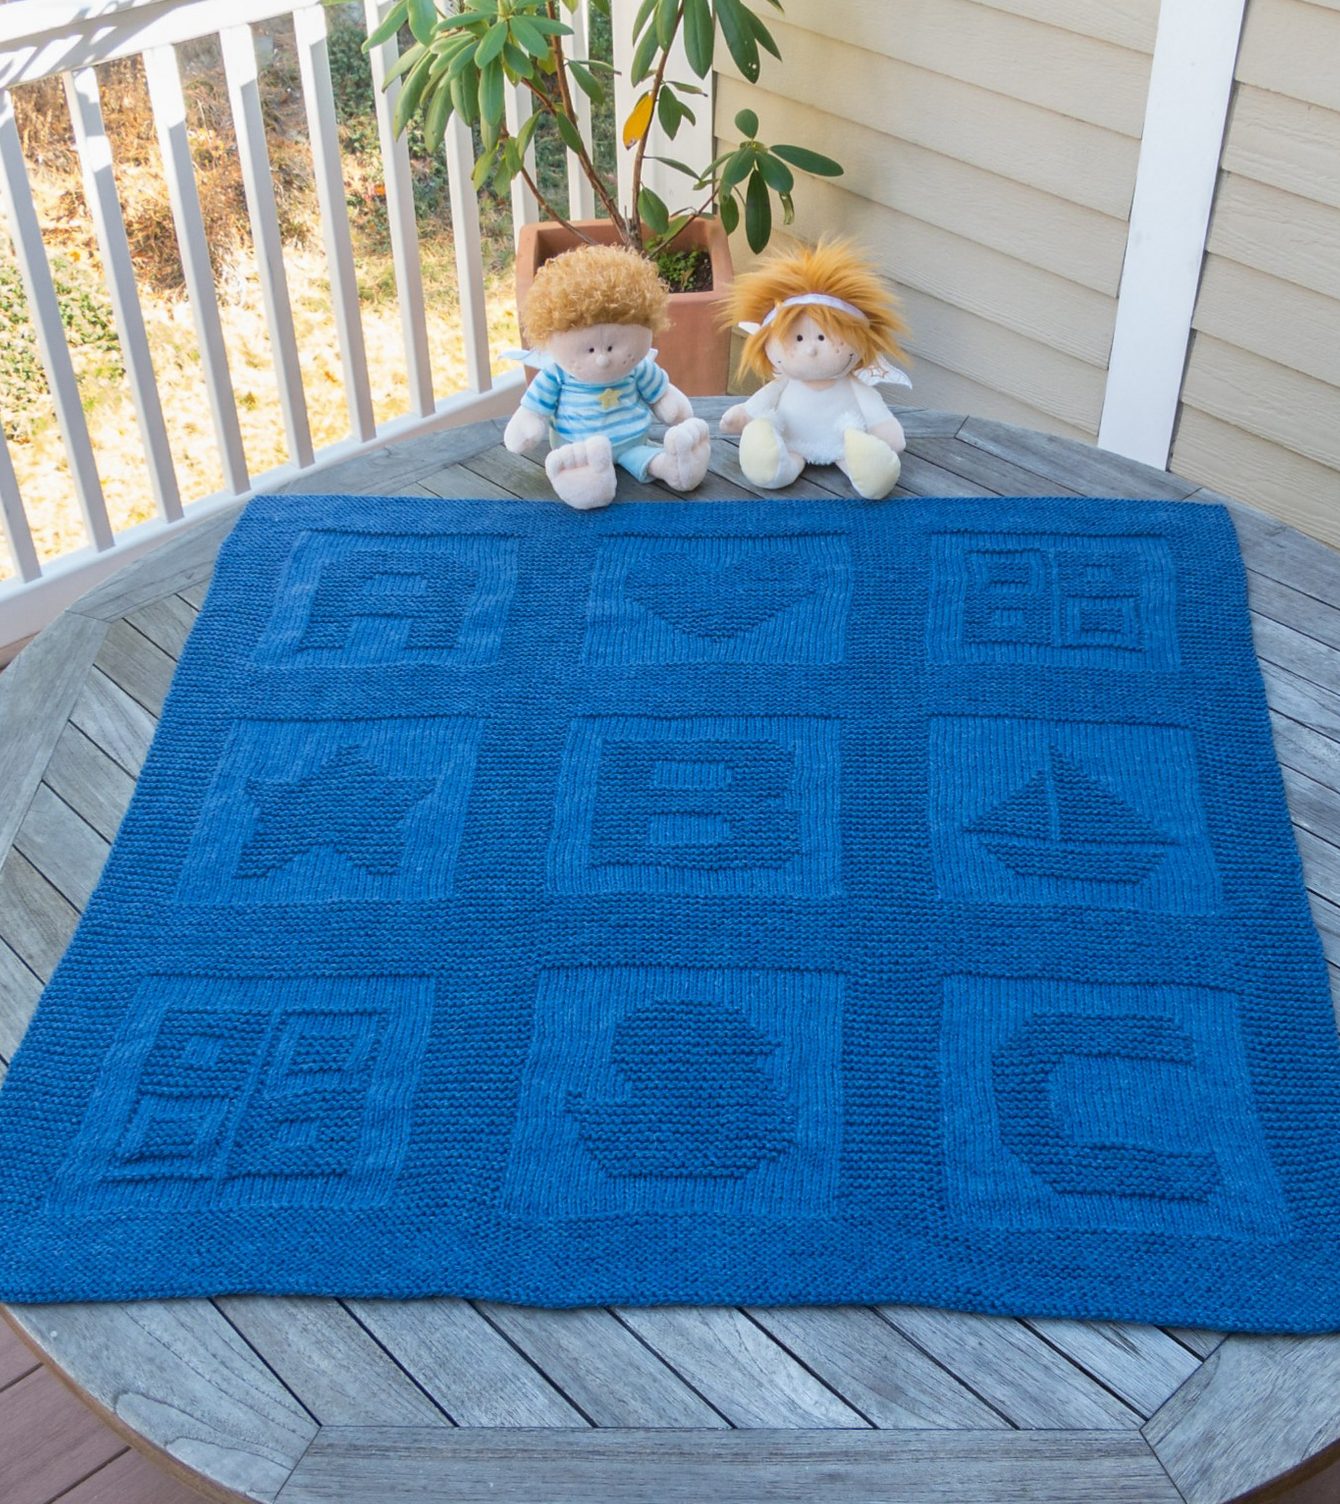 Free knitting patterns for baby blankets - ideas and ...